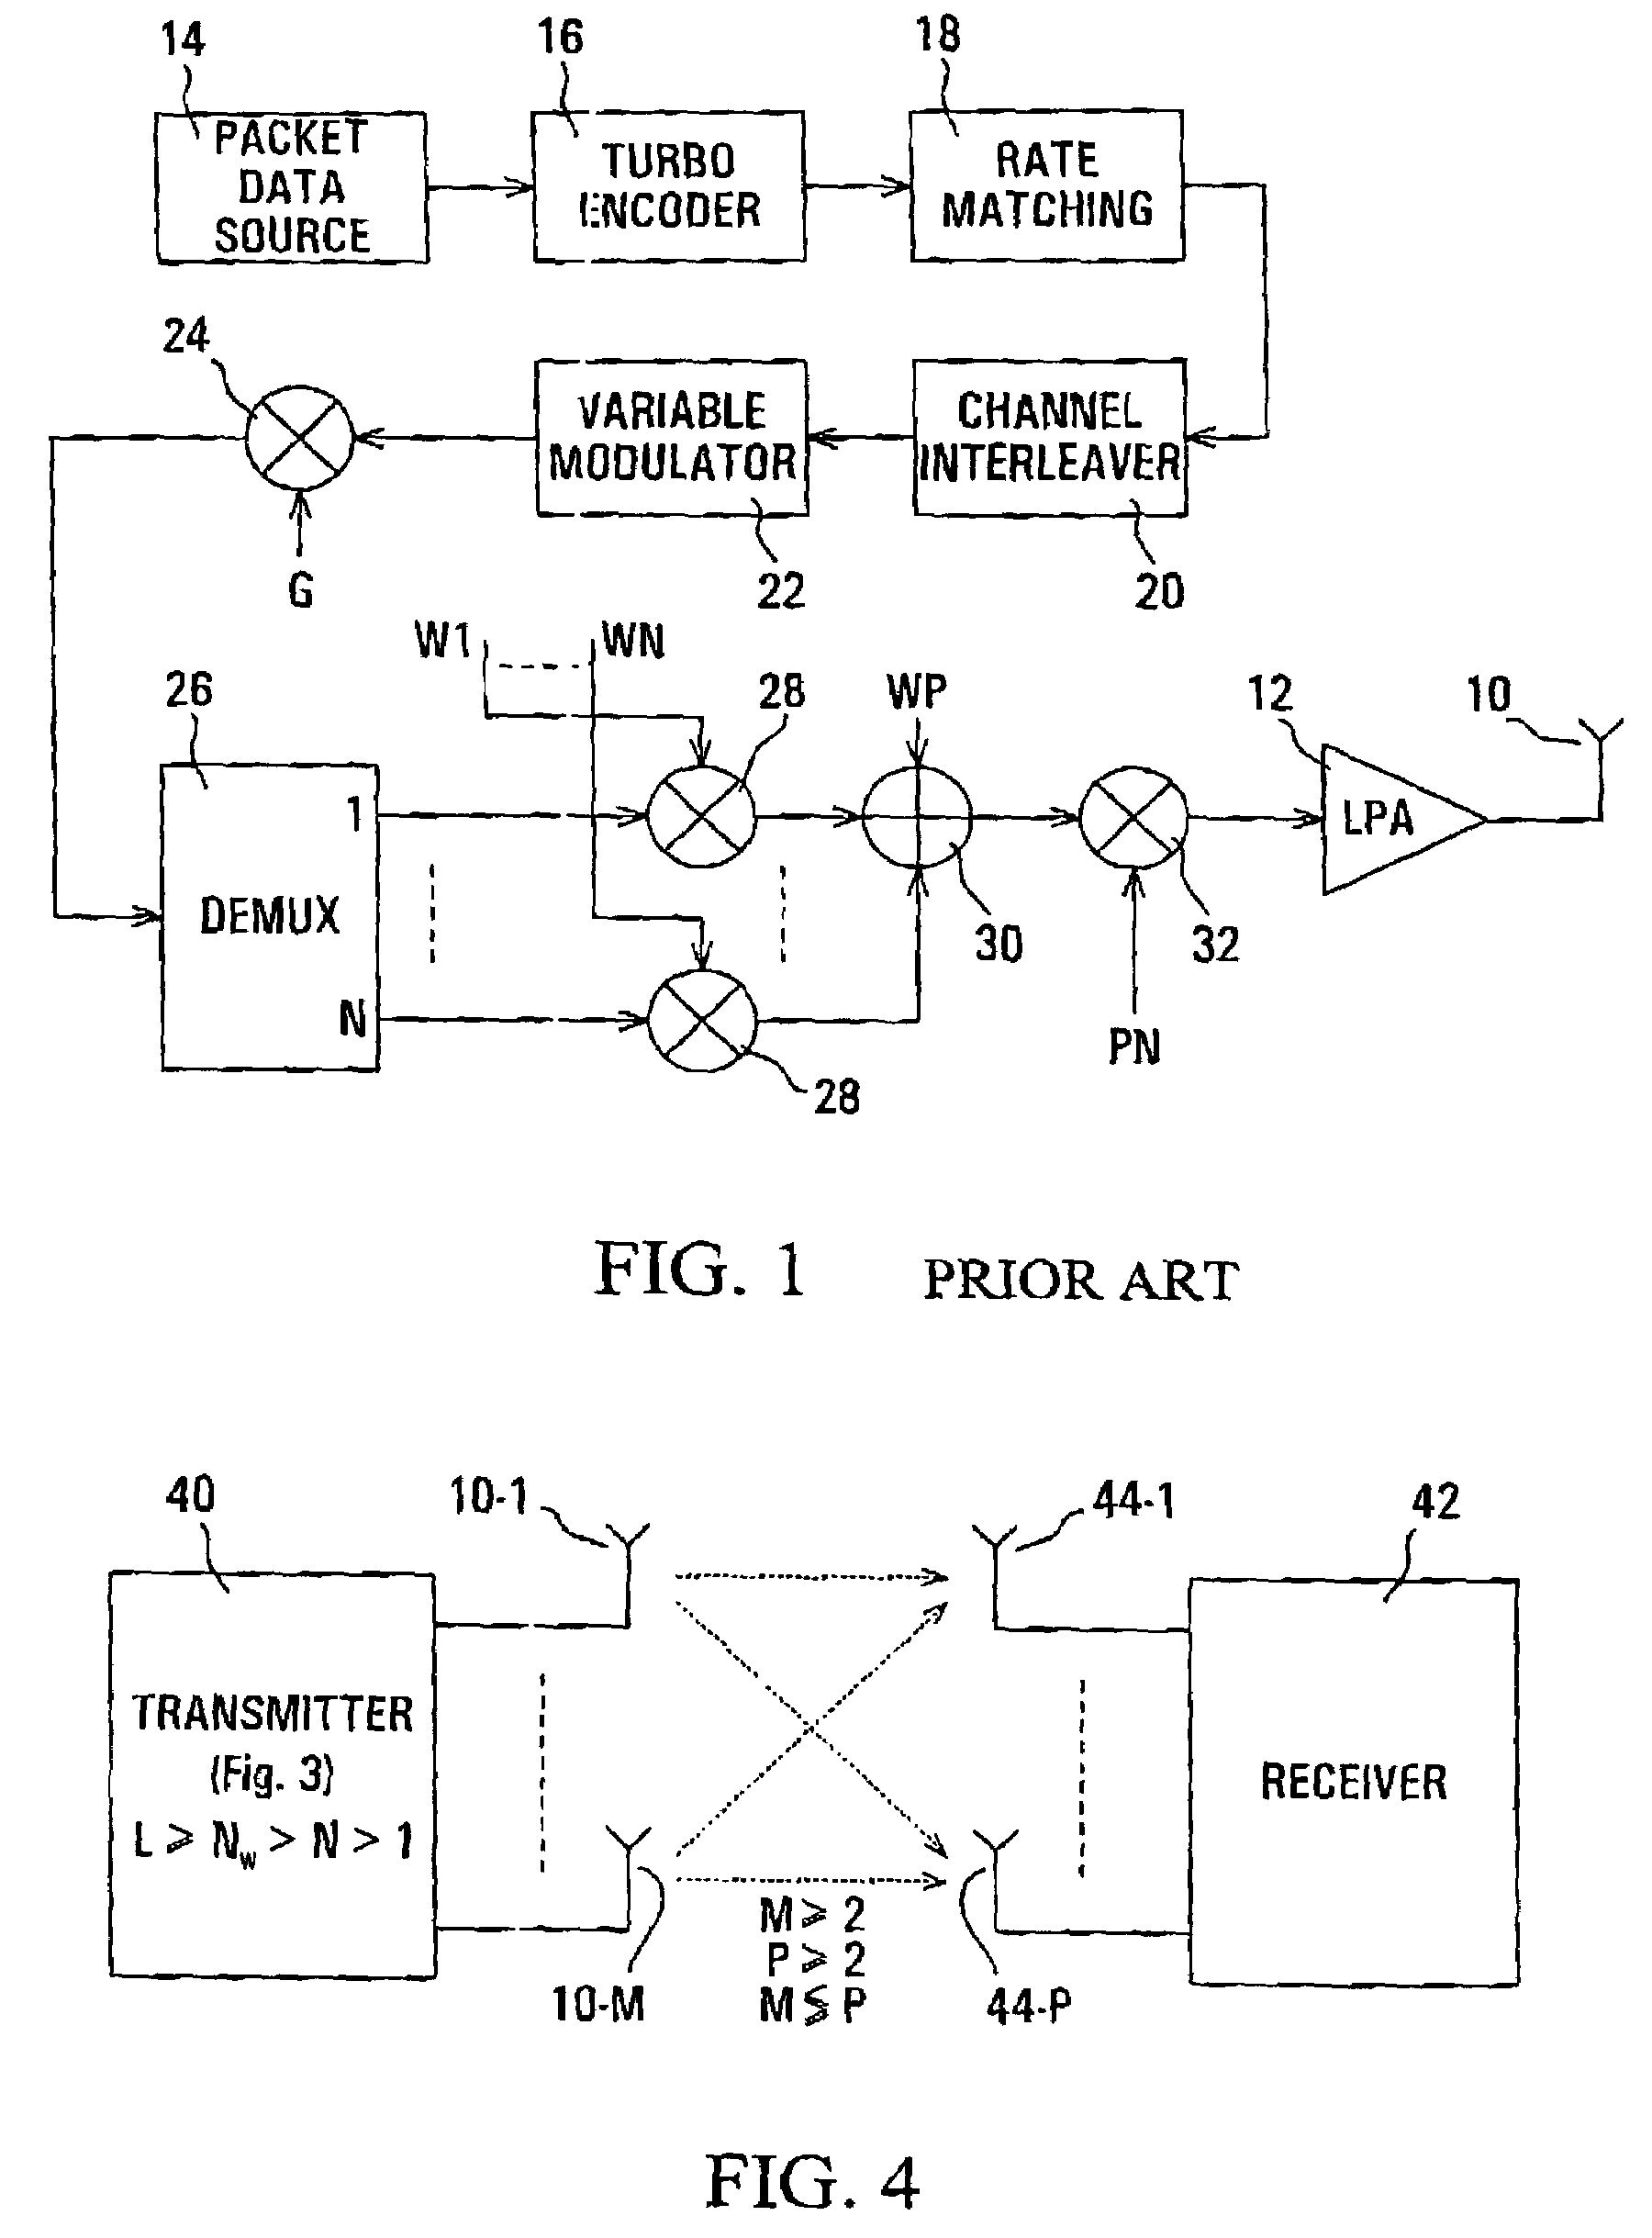 Transmitter for a wireless communications system using multiple codes and multiple antennas